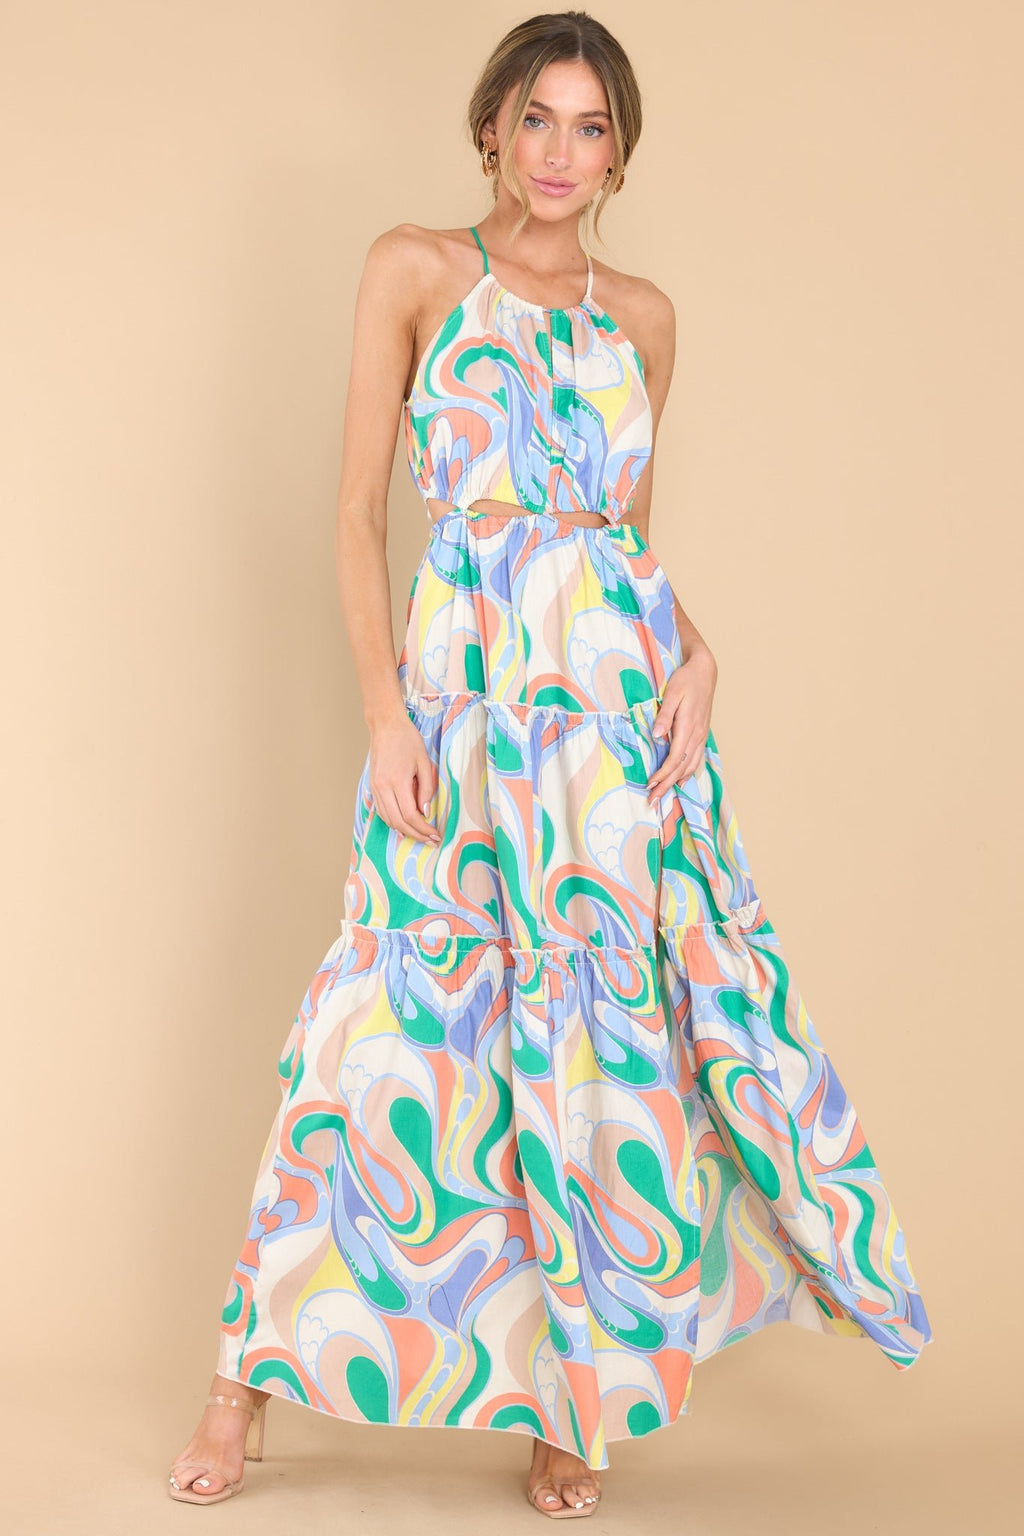 Vibrant Ivory Multi-Tier Maxi - All Dresses | Red Dress